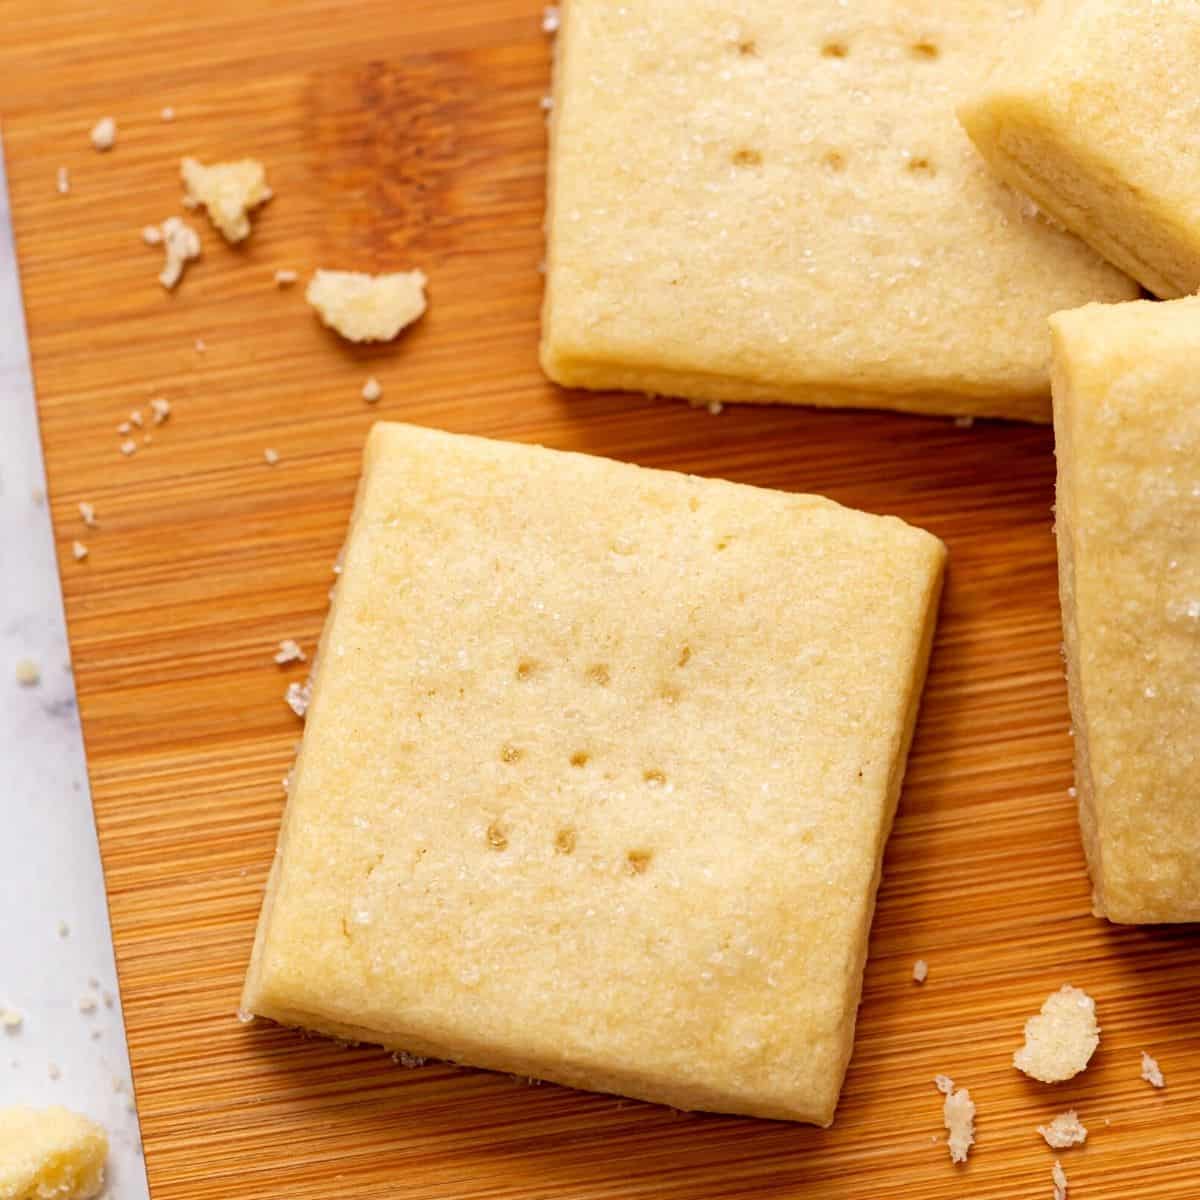 Baked Shortbread Cookies on wooden Cutting board.